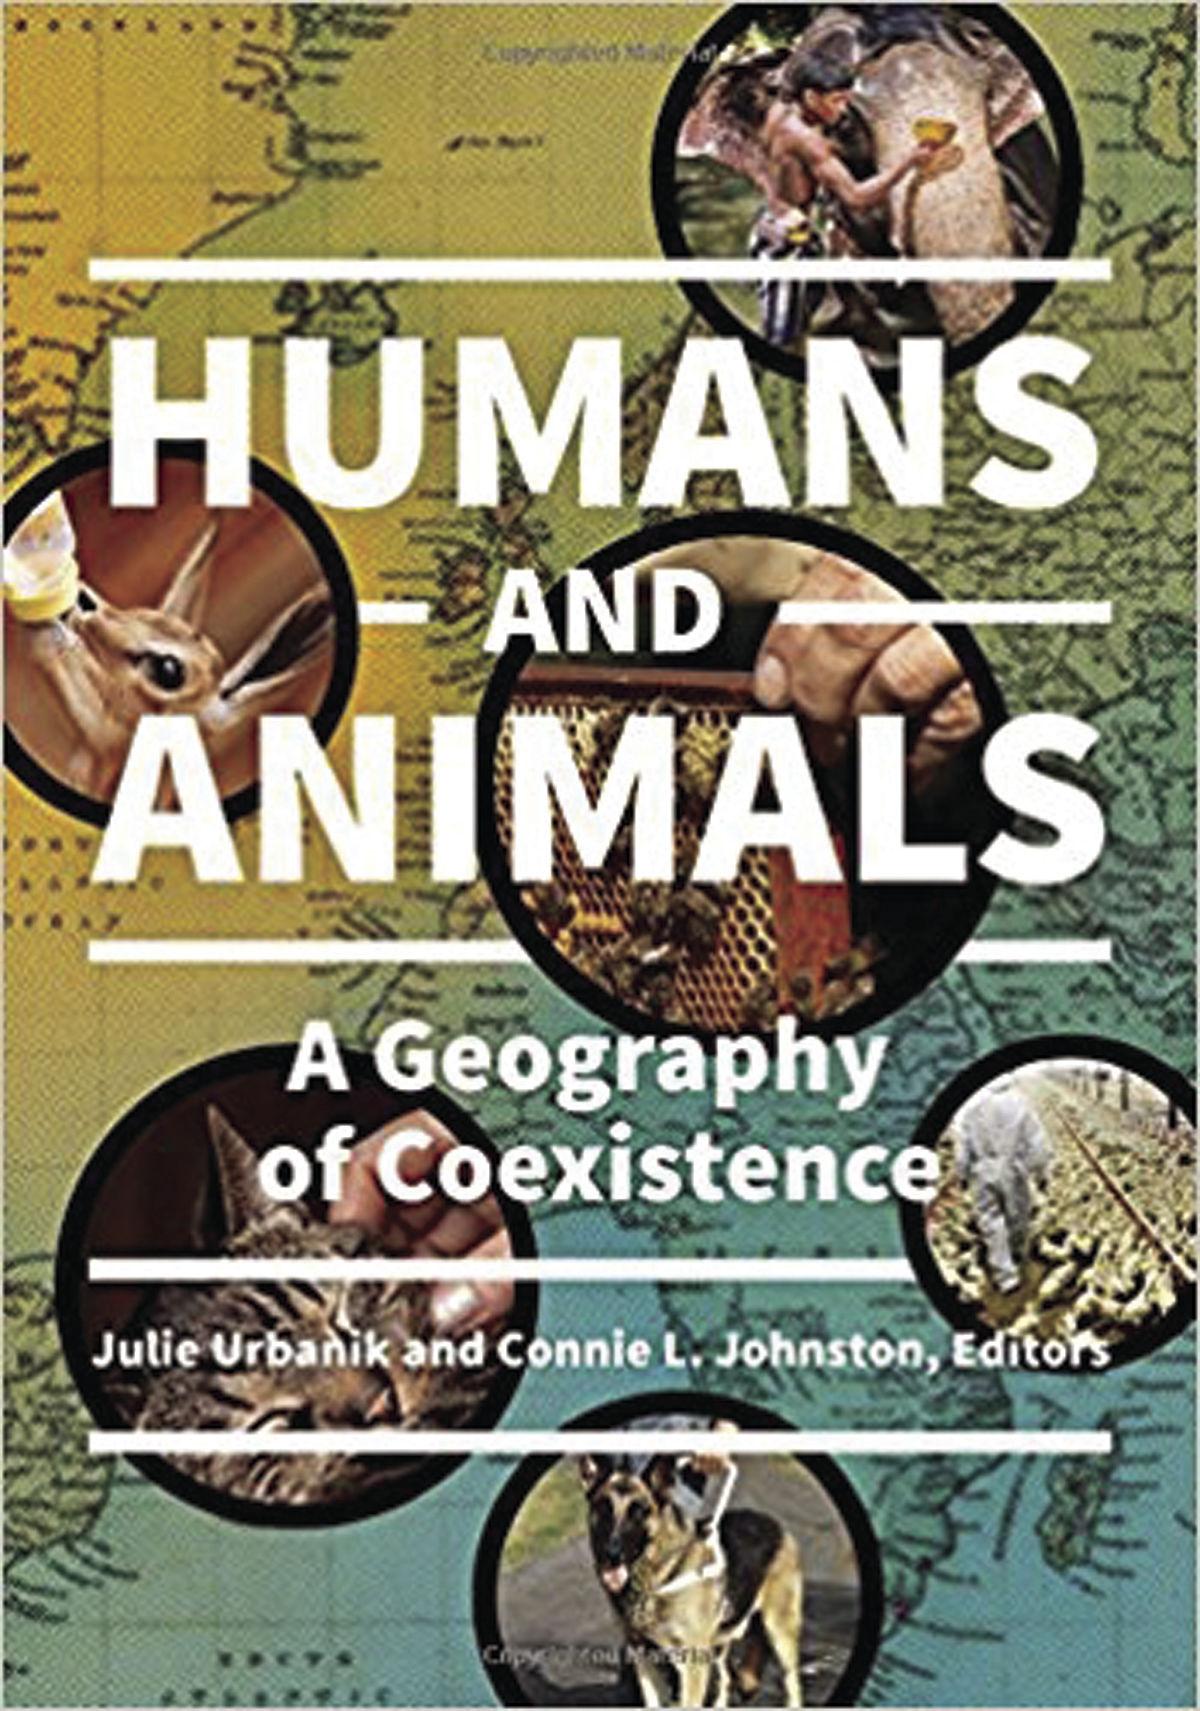 How humans connect with the animal kingdom | Arts Entertainment